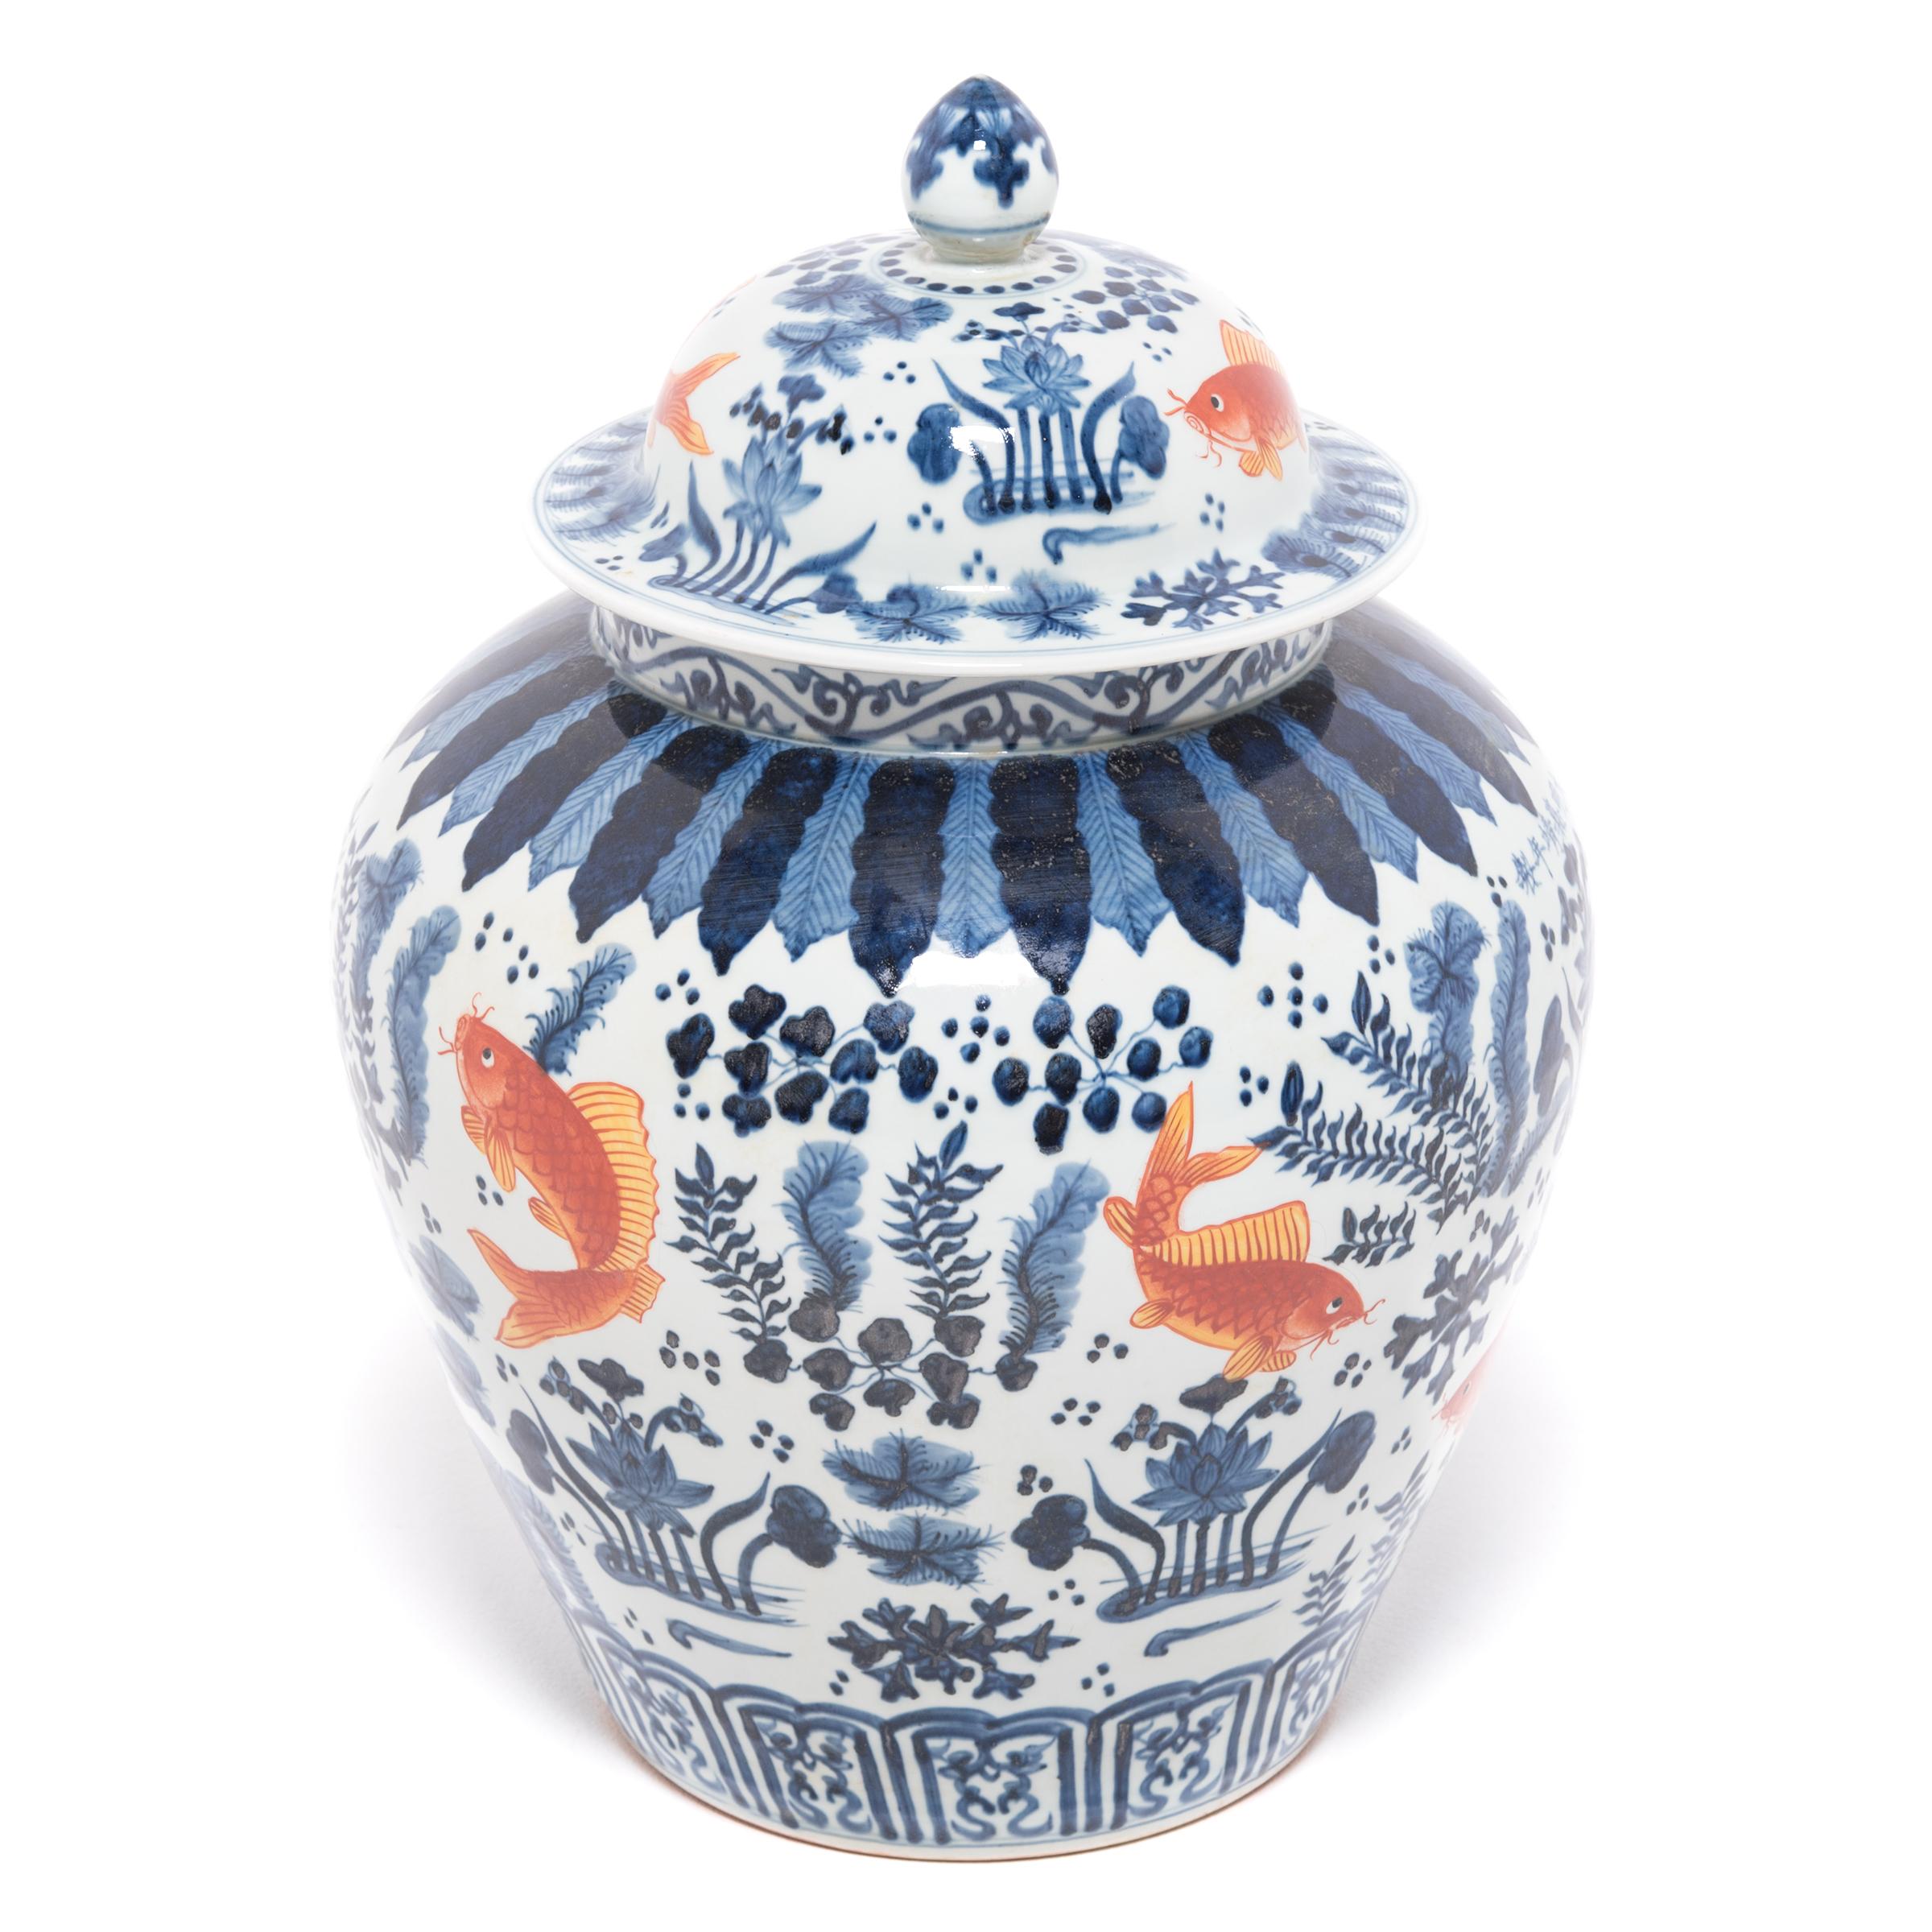 A modern artisan applied the vibrant copper and indigo imagery before firing, a process of under glazing that was developed during the Song dynasty. The finely painted symbols, fish, lotus pods, and underwater plants hold deeper meaning in Chinese